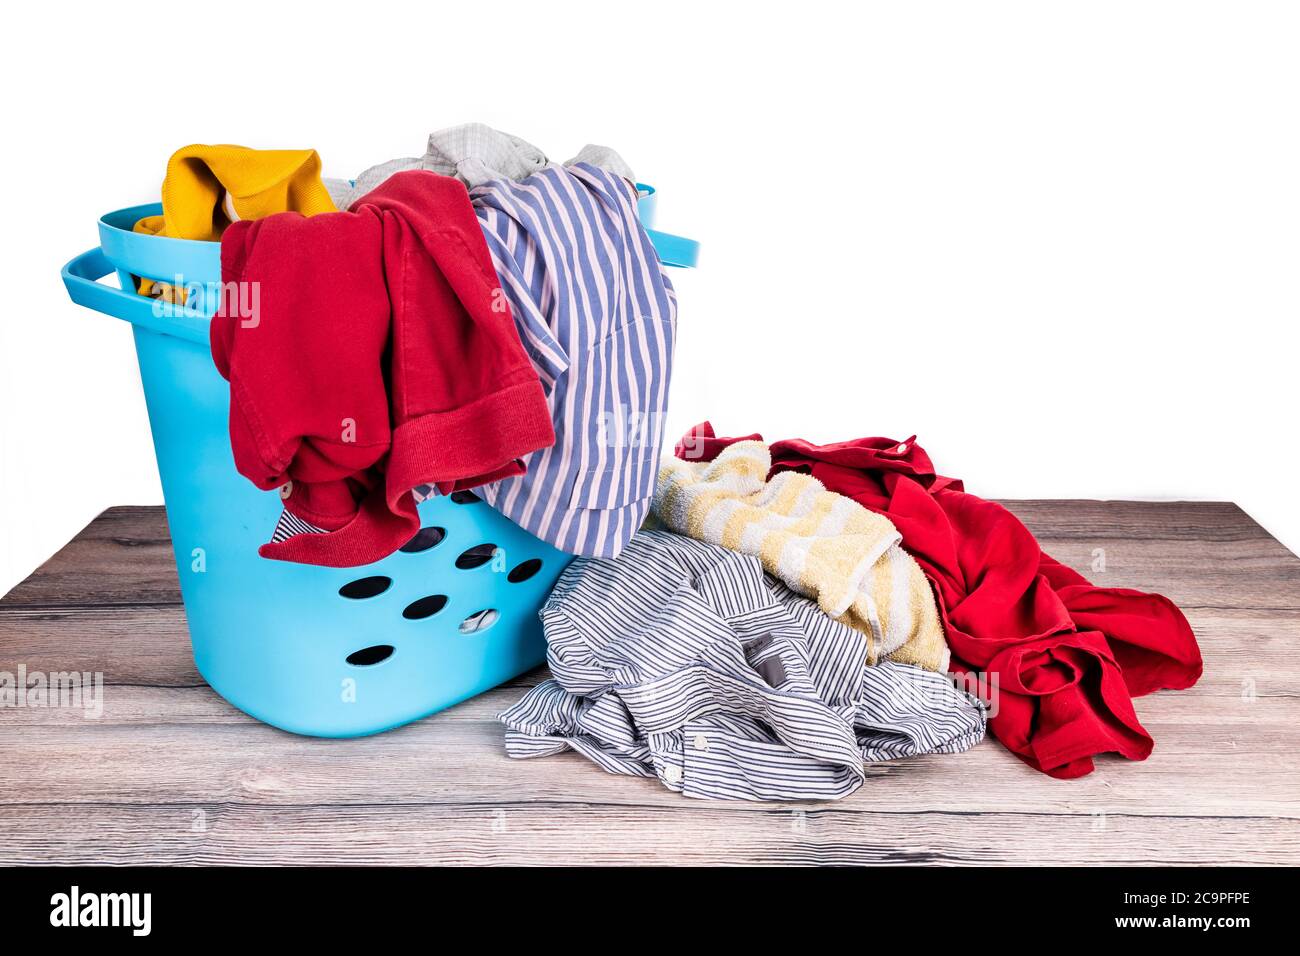 Laundry basket full of worn apparels for washing on wooden table against white background Stock Photo